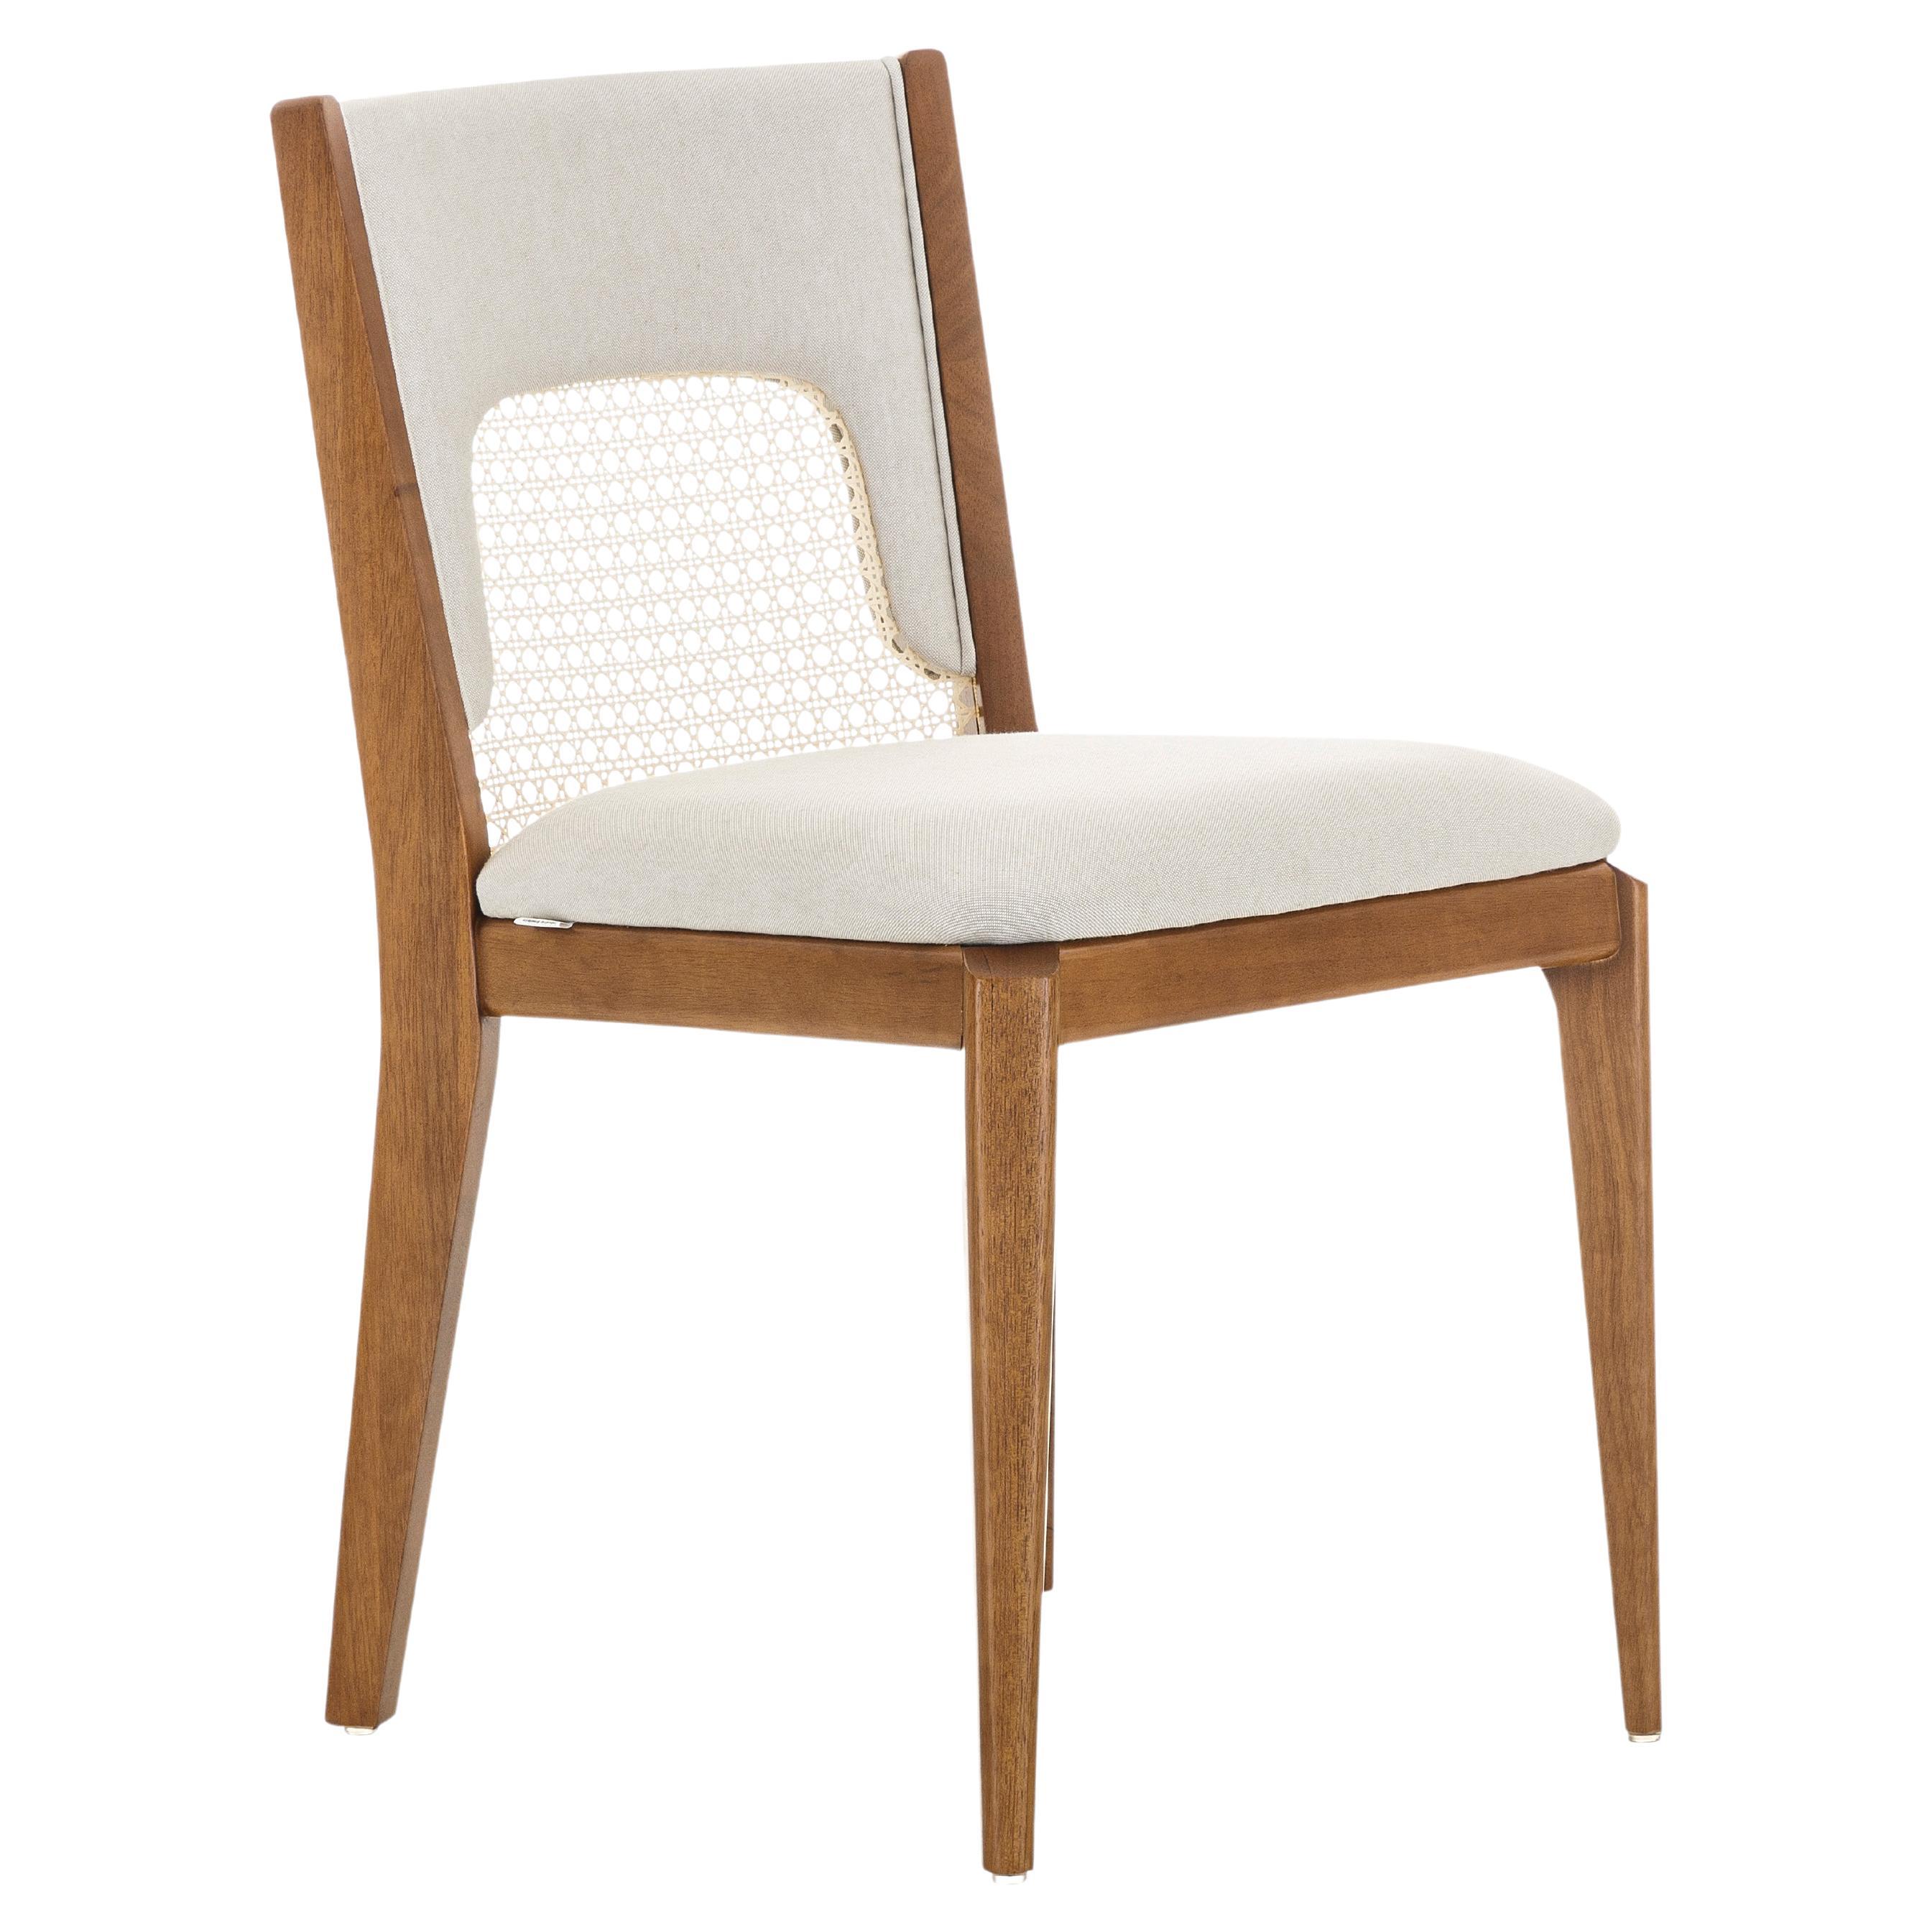 The Zani dining chair is synonymous with style, elegance, comfort, and quality with its white upholstery back and an oak wood finish. With the Zani chair, Uultis has combined all of these qualities together. A simple cane in the back seat makes a